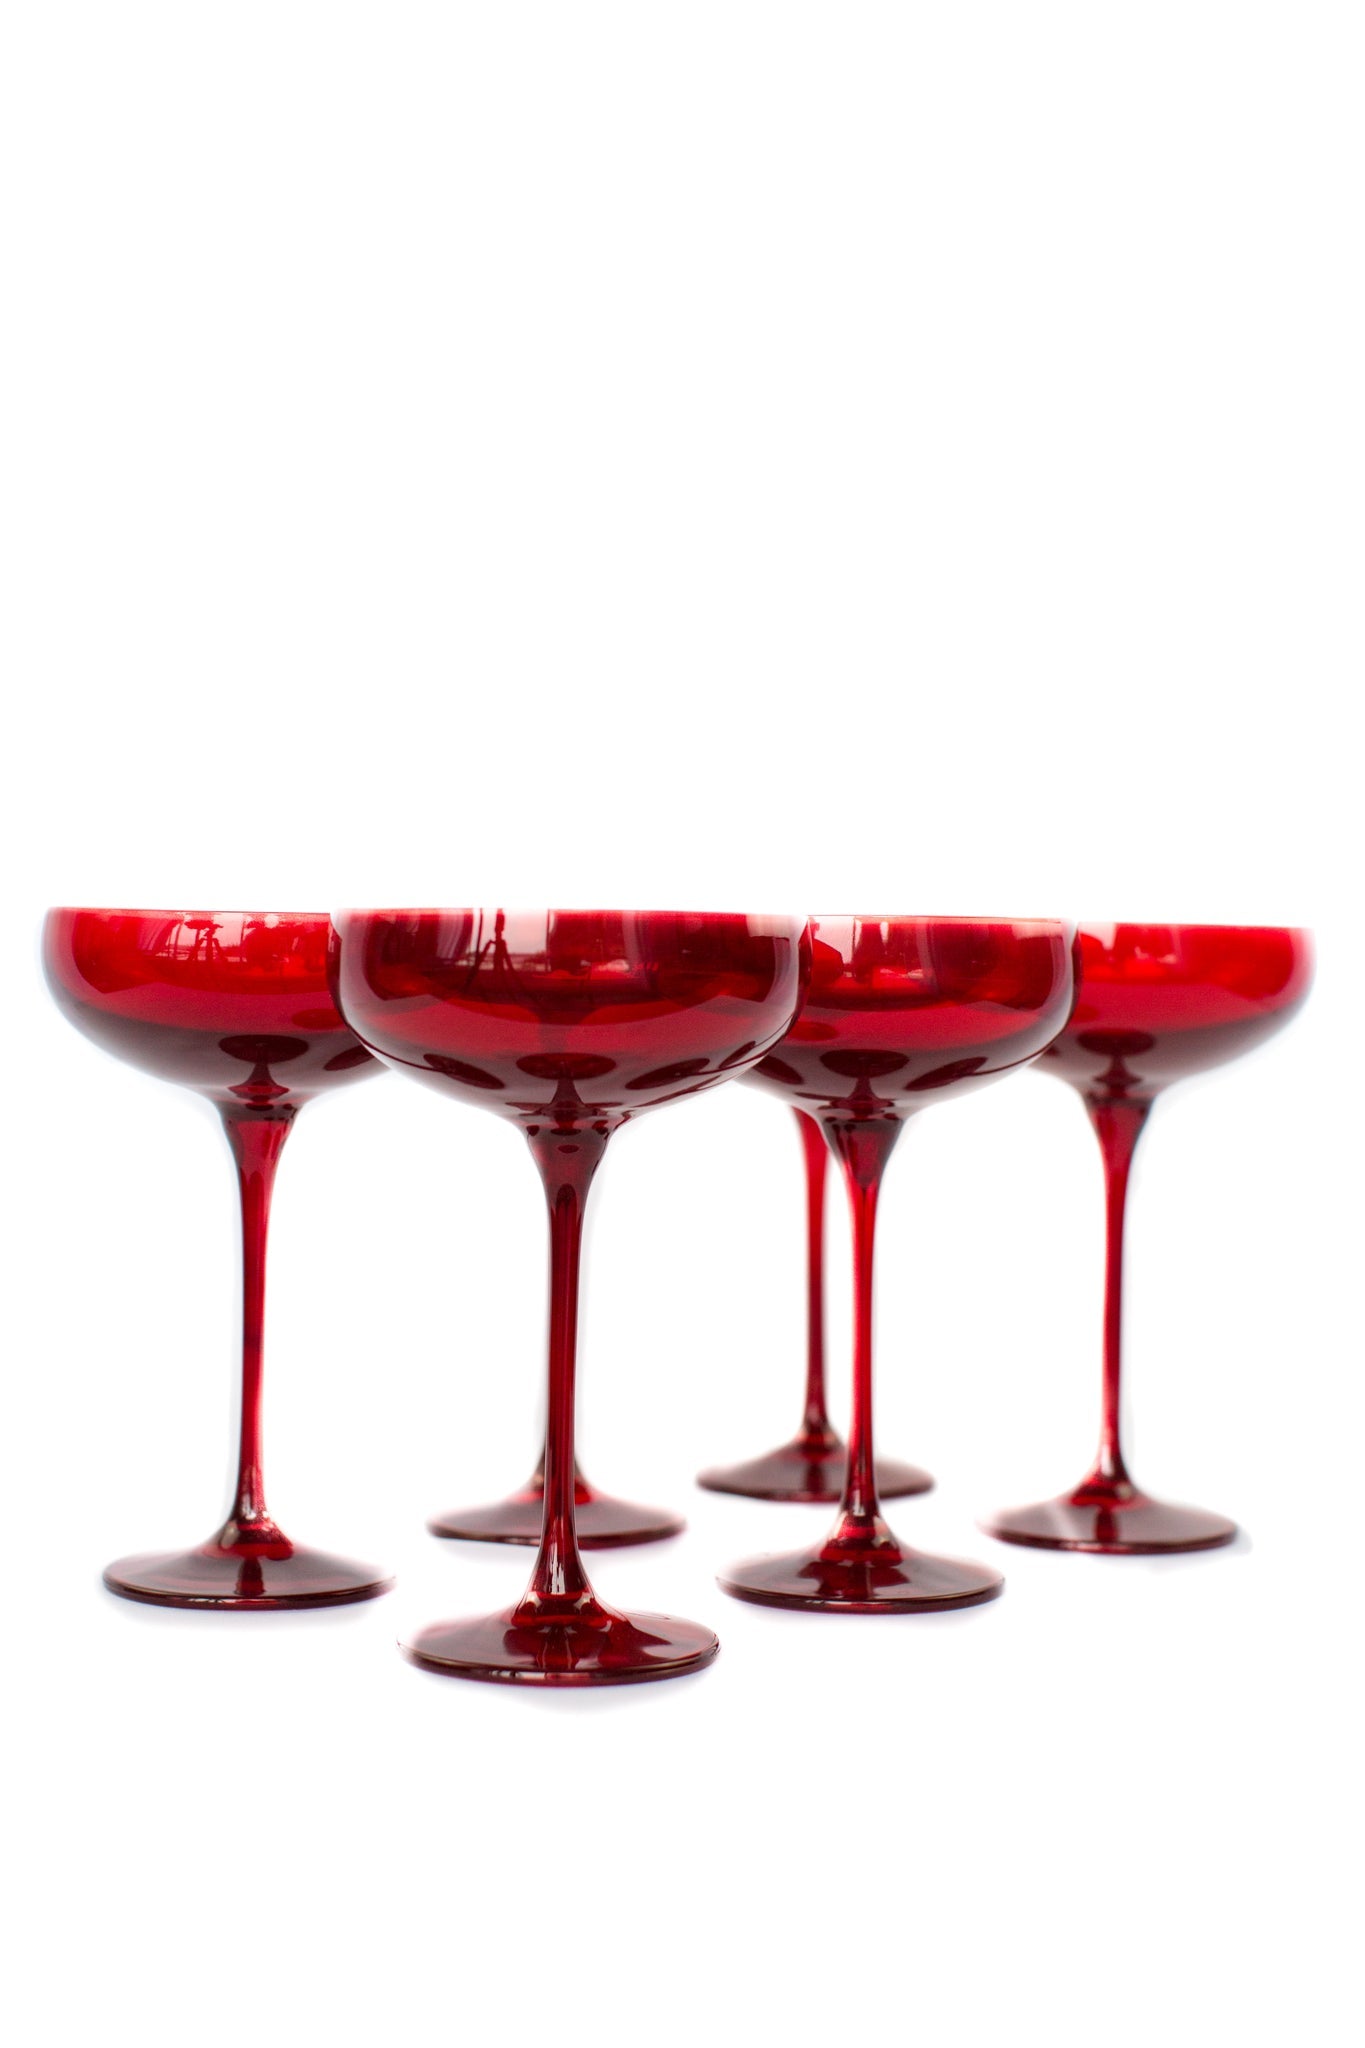 Estelle Champagne Coupe Glasses - Set of 6 - Red